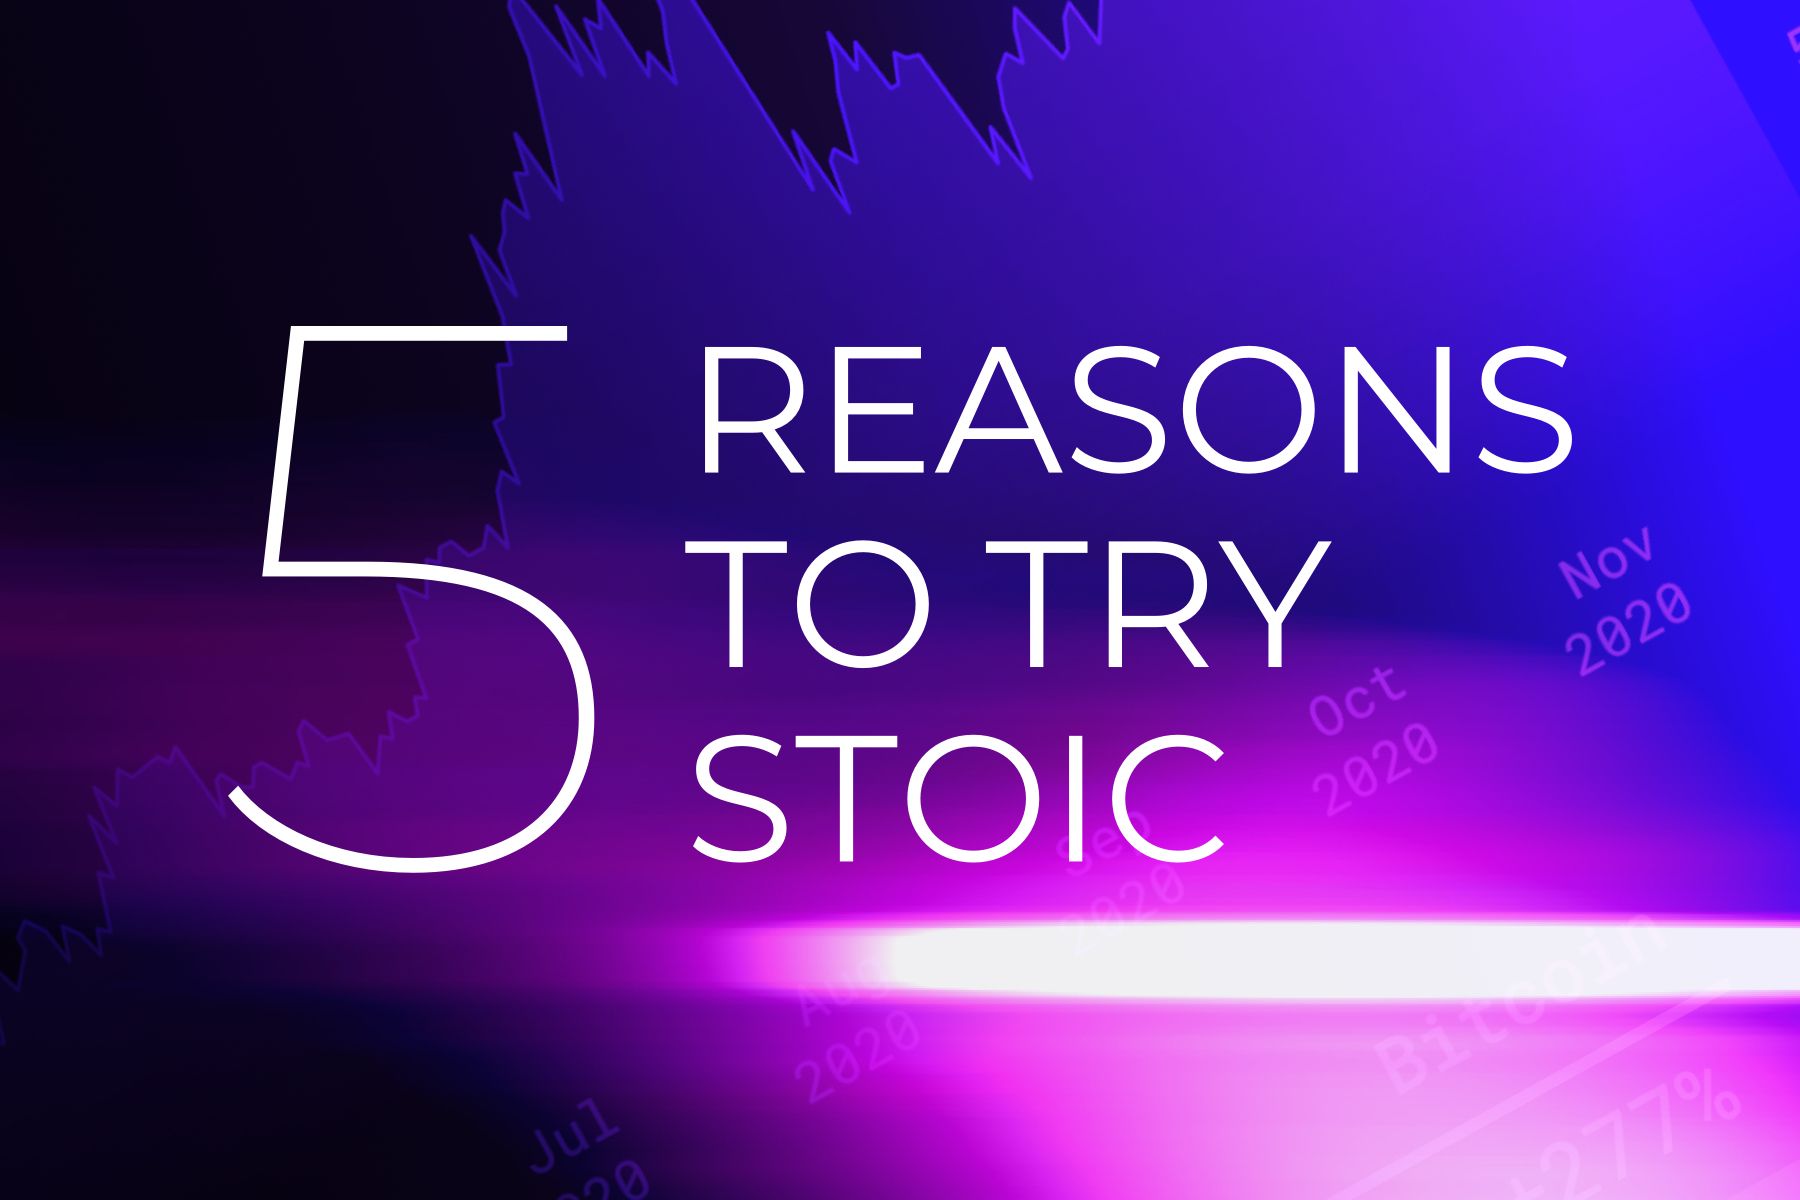 5 reasons to try auto crypto trading with Stoic